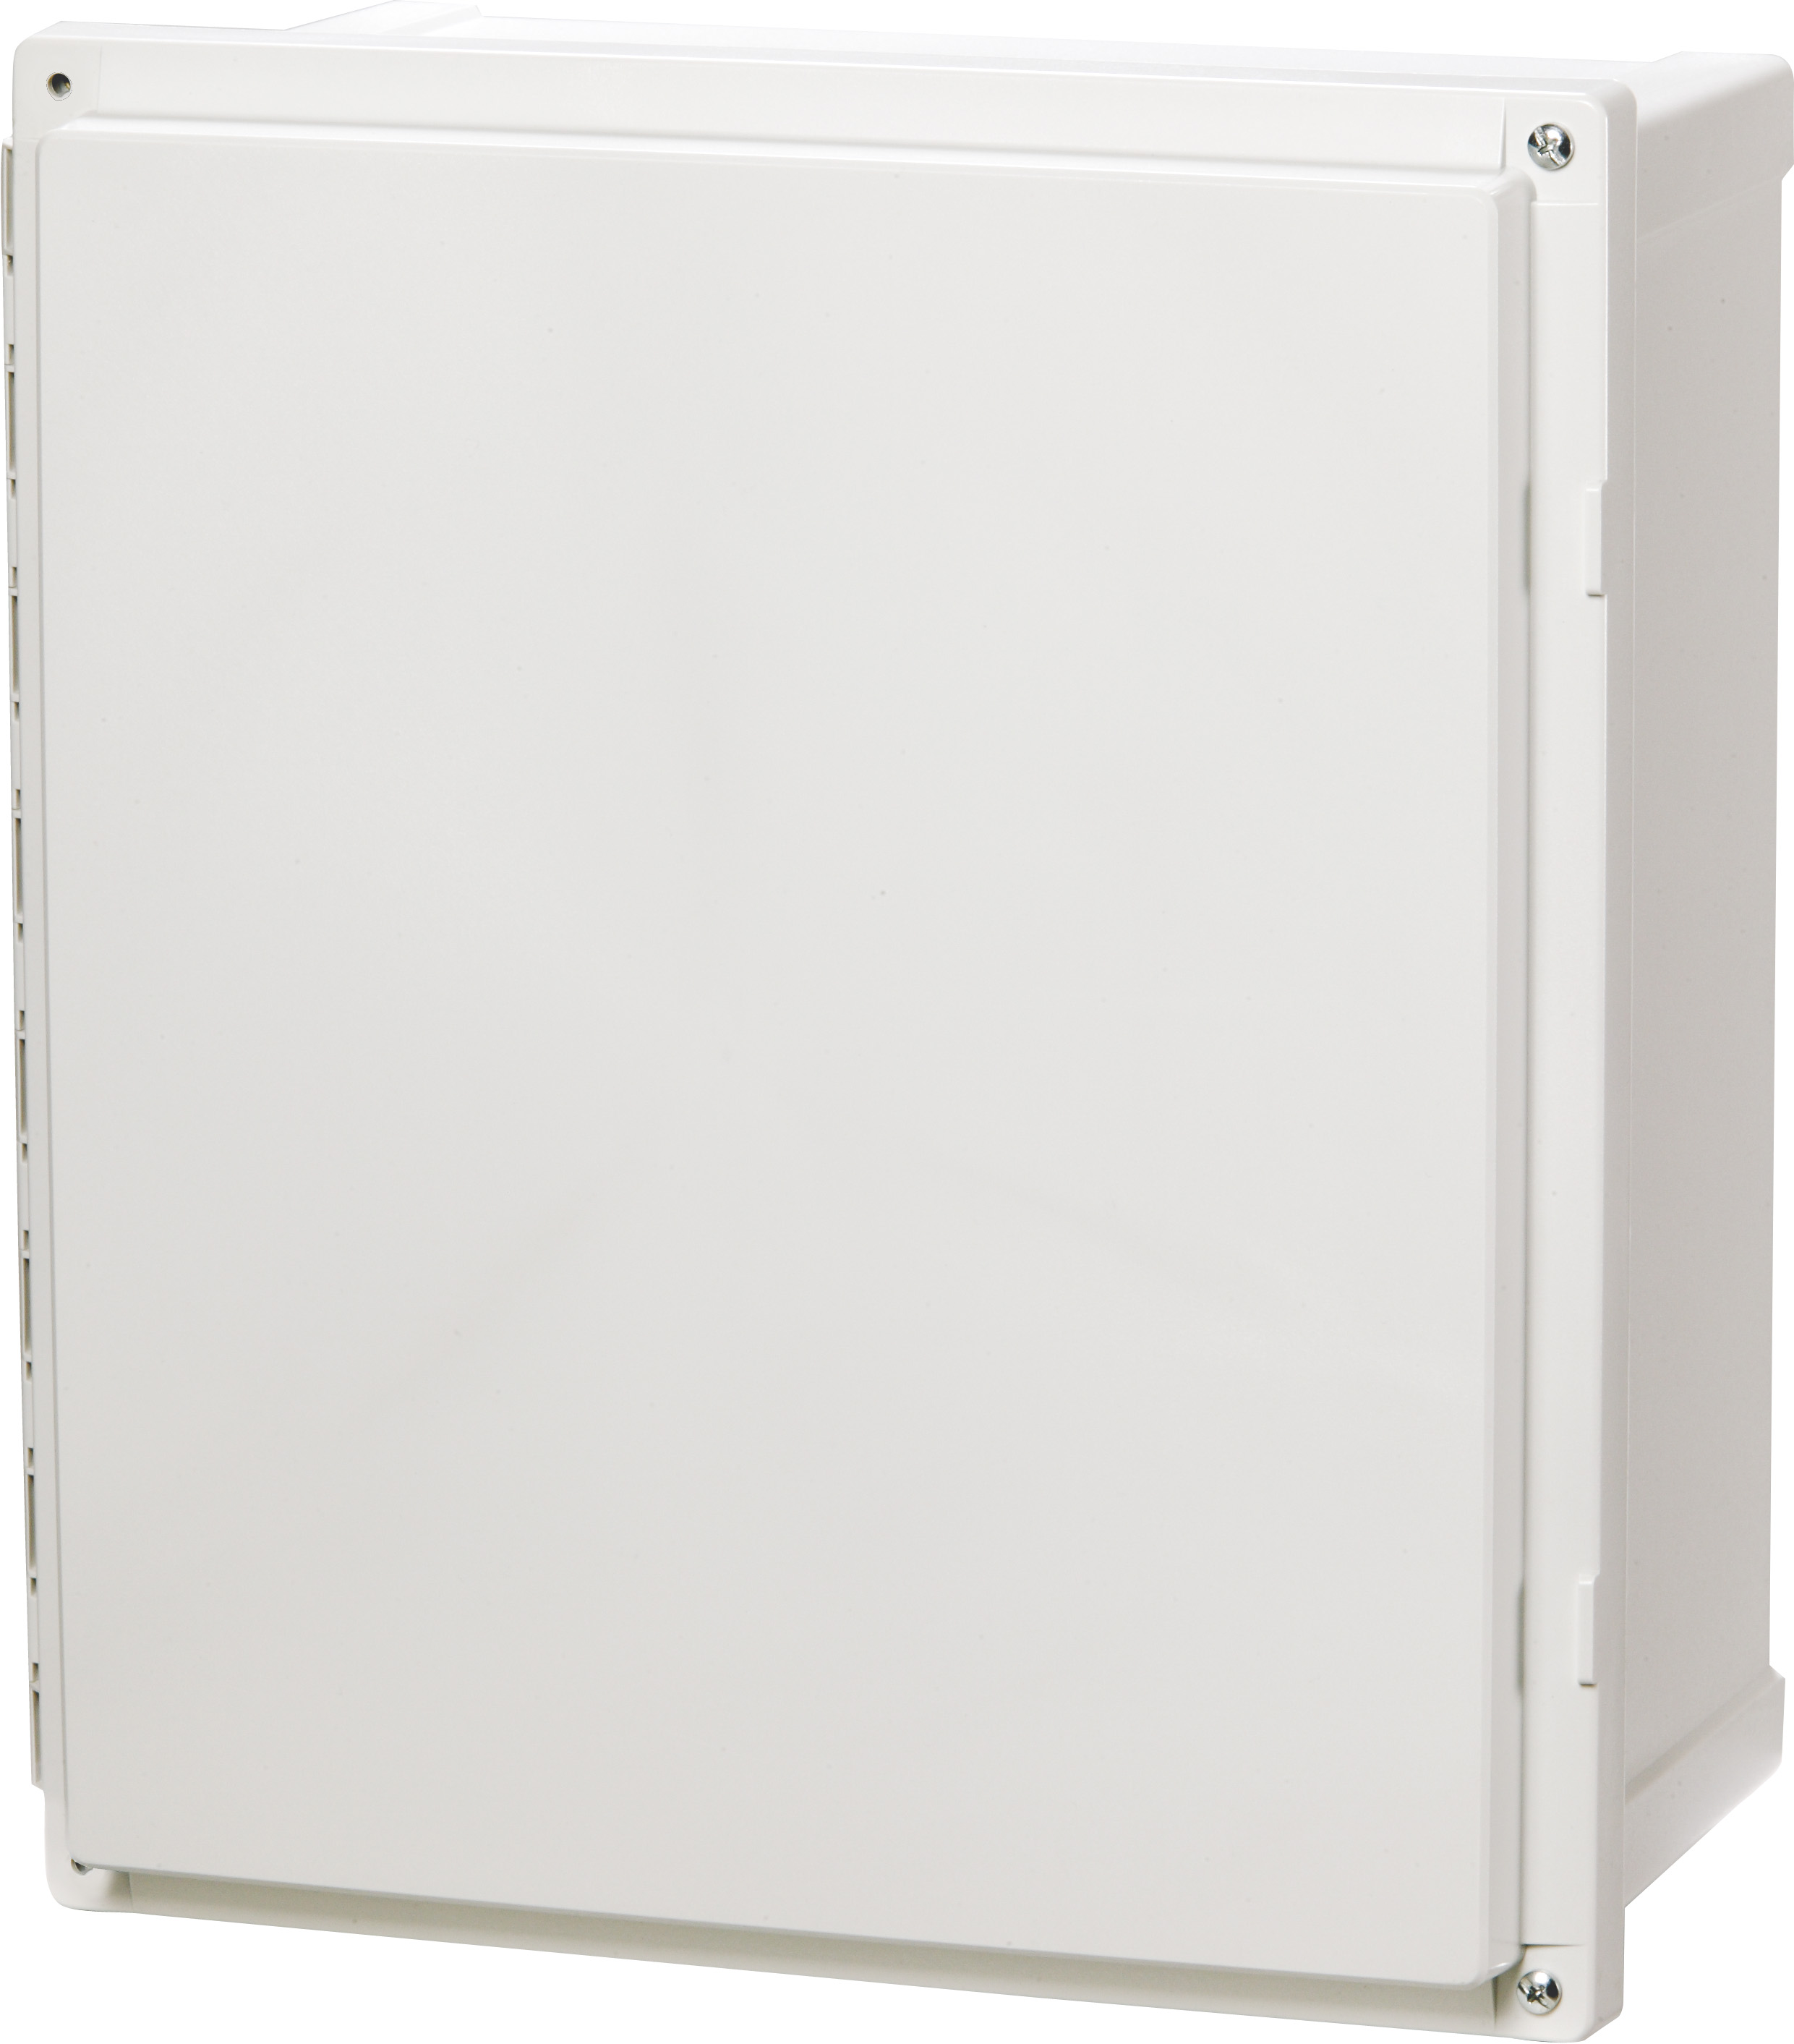 10 Height 16 Width 18 Length 10 Height 16 Width 18 Length Fibox Enclosures AR181610CHSSL UL Listed Nema 4X Polycarbonate Enclosure with Hinged Opaque Screw Cover and Stainless Steel Lockable Latch 